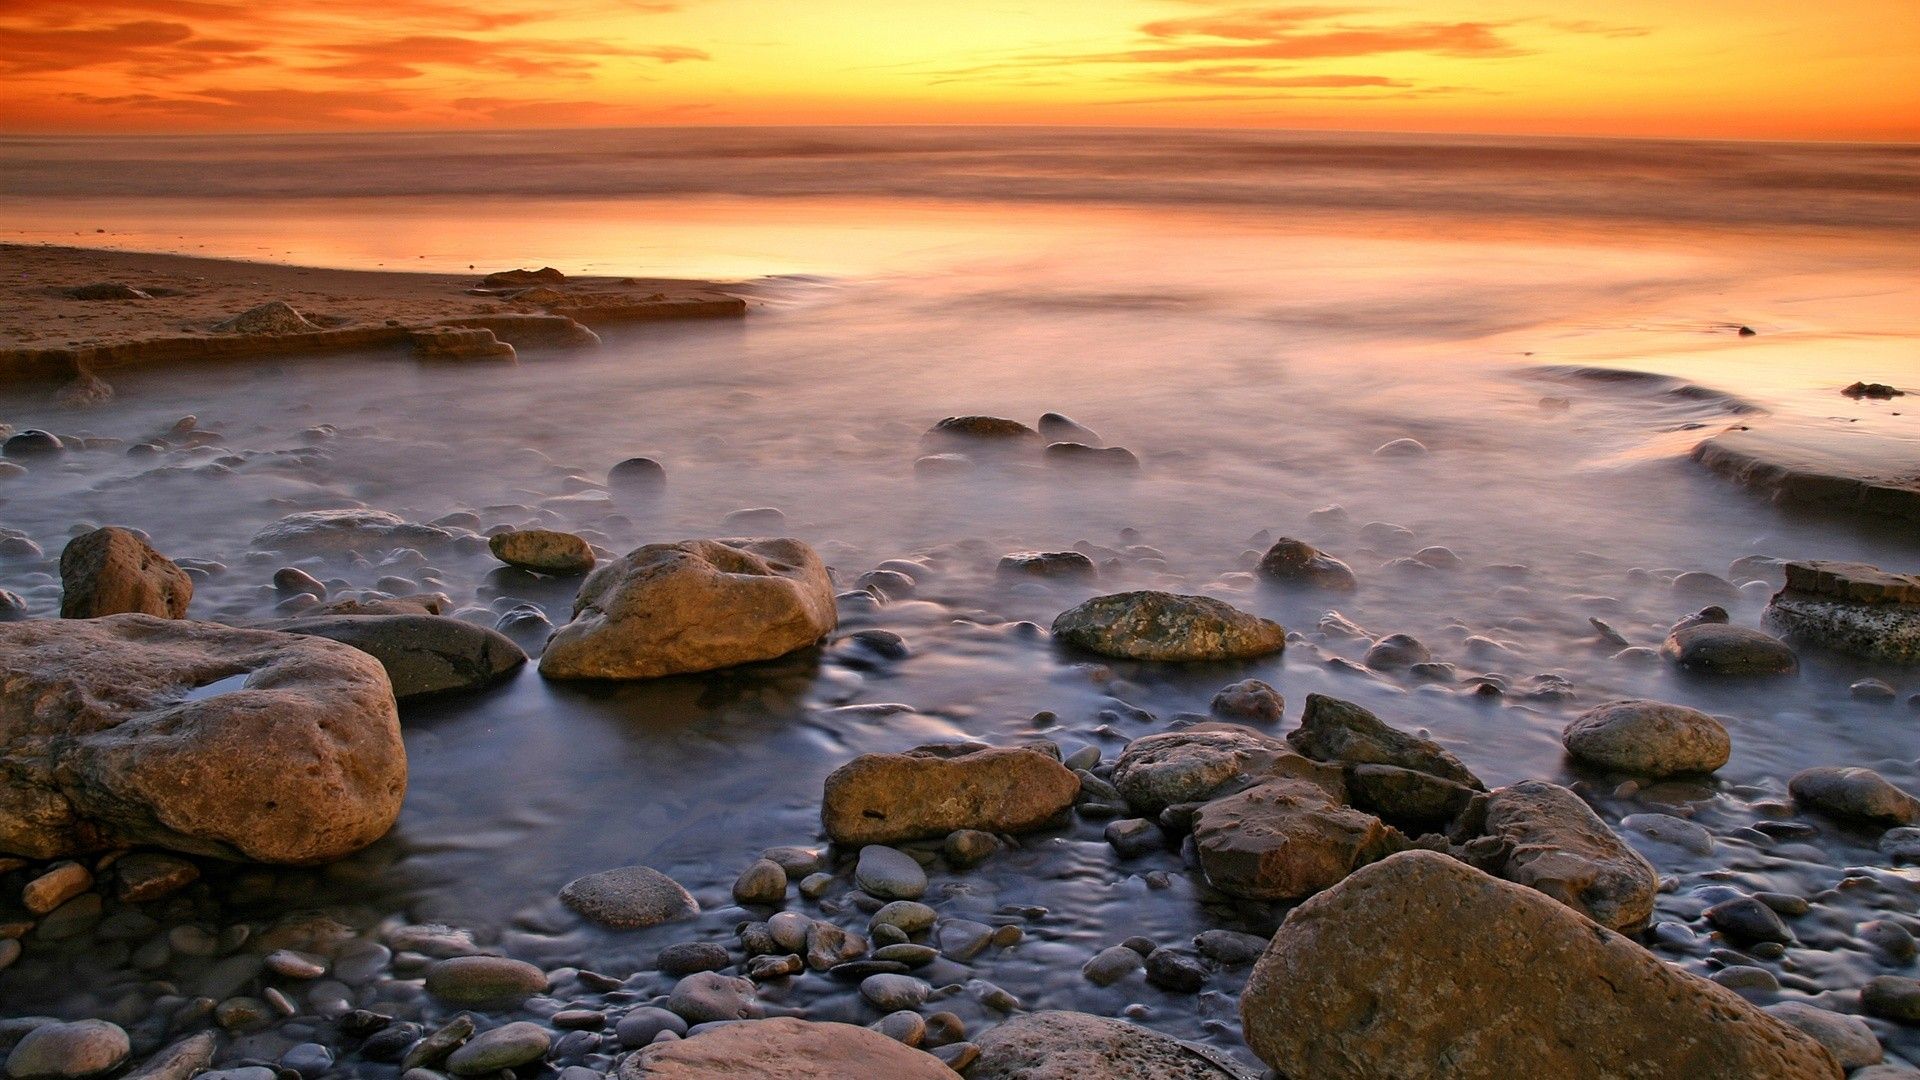 Beach Landscape With Water And Rocks